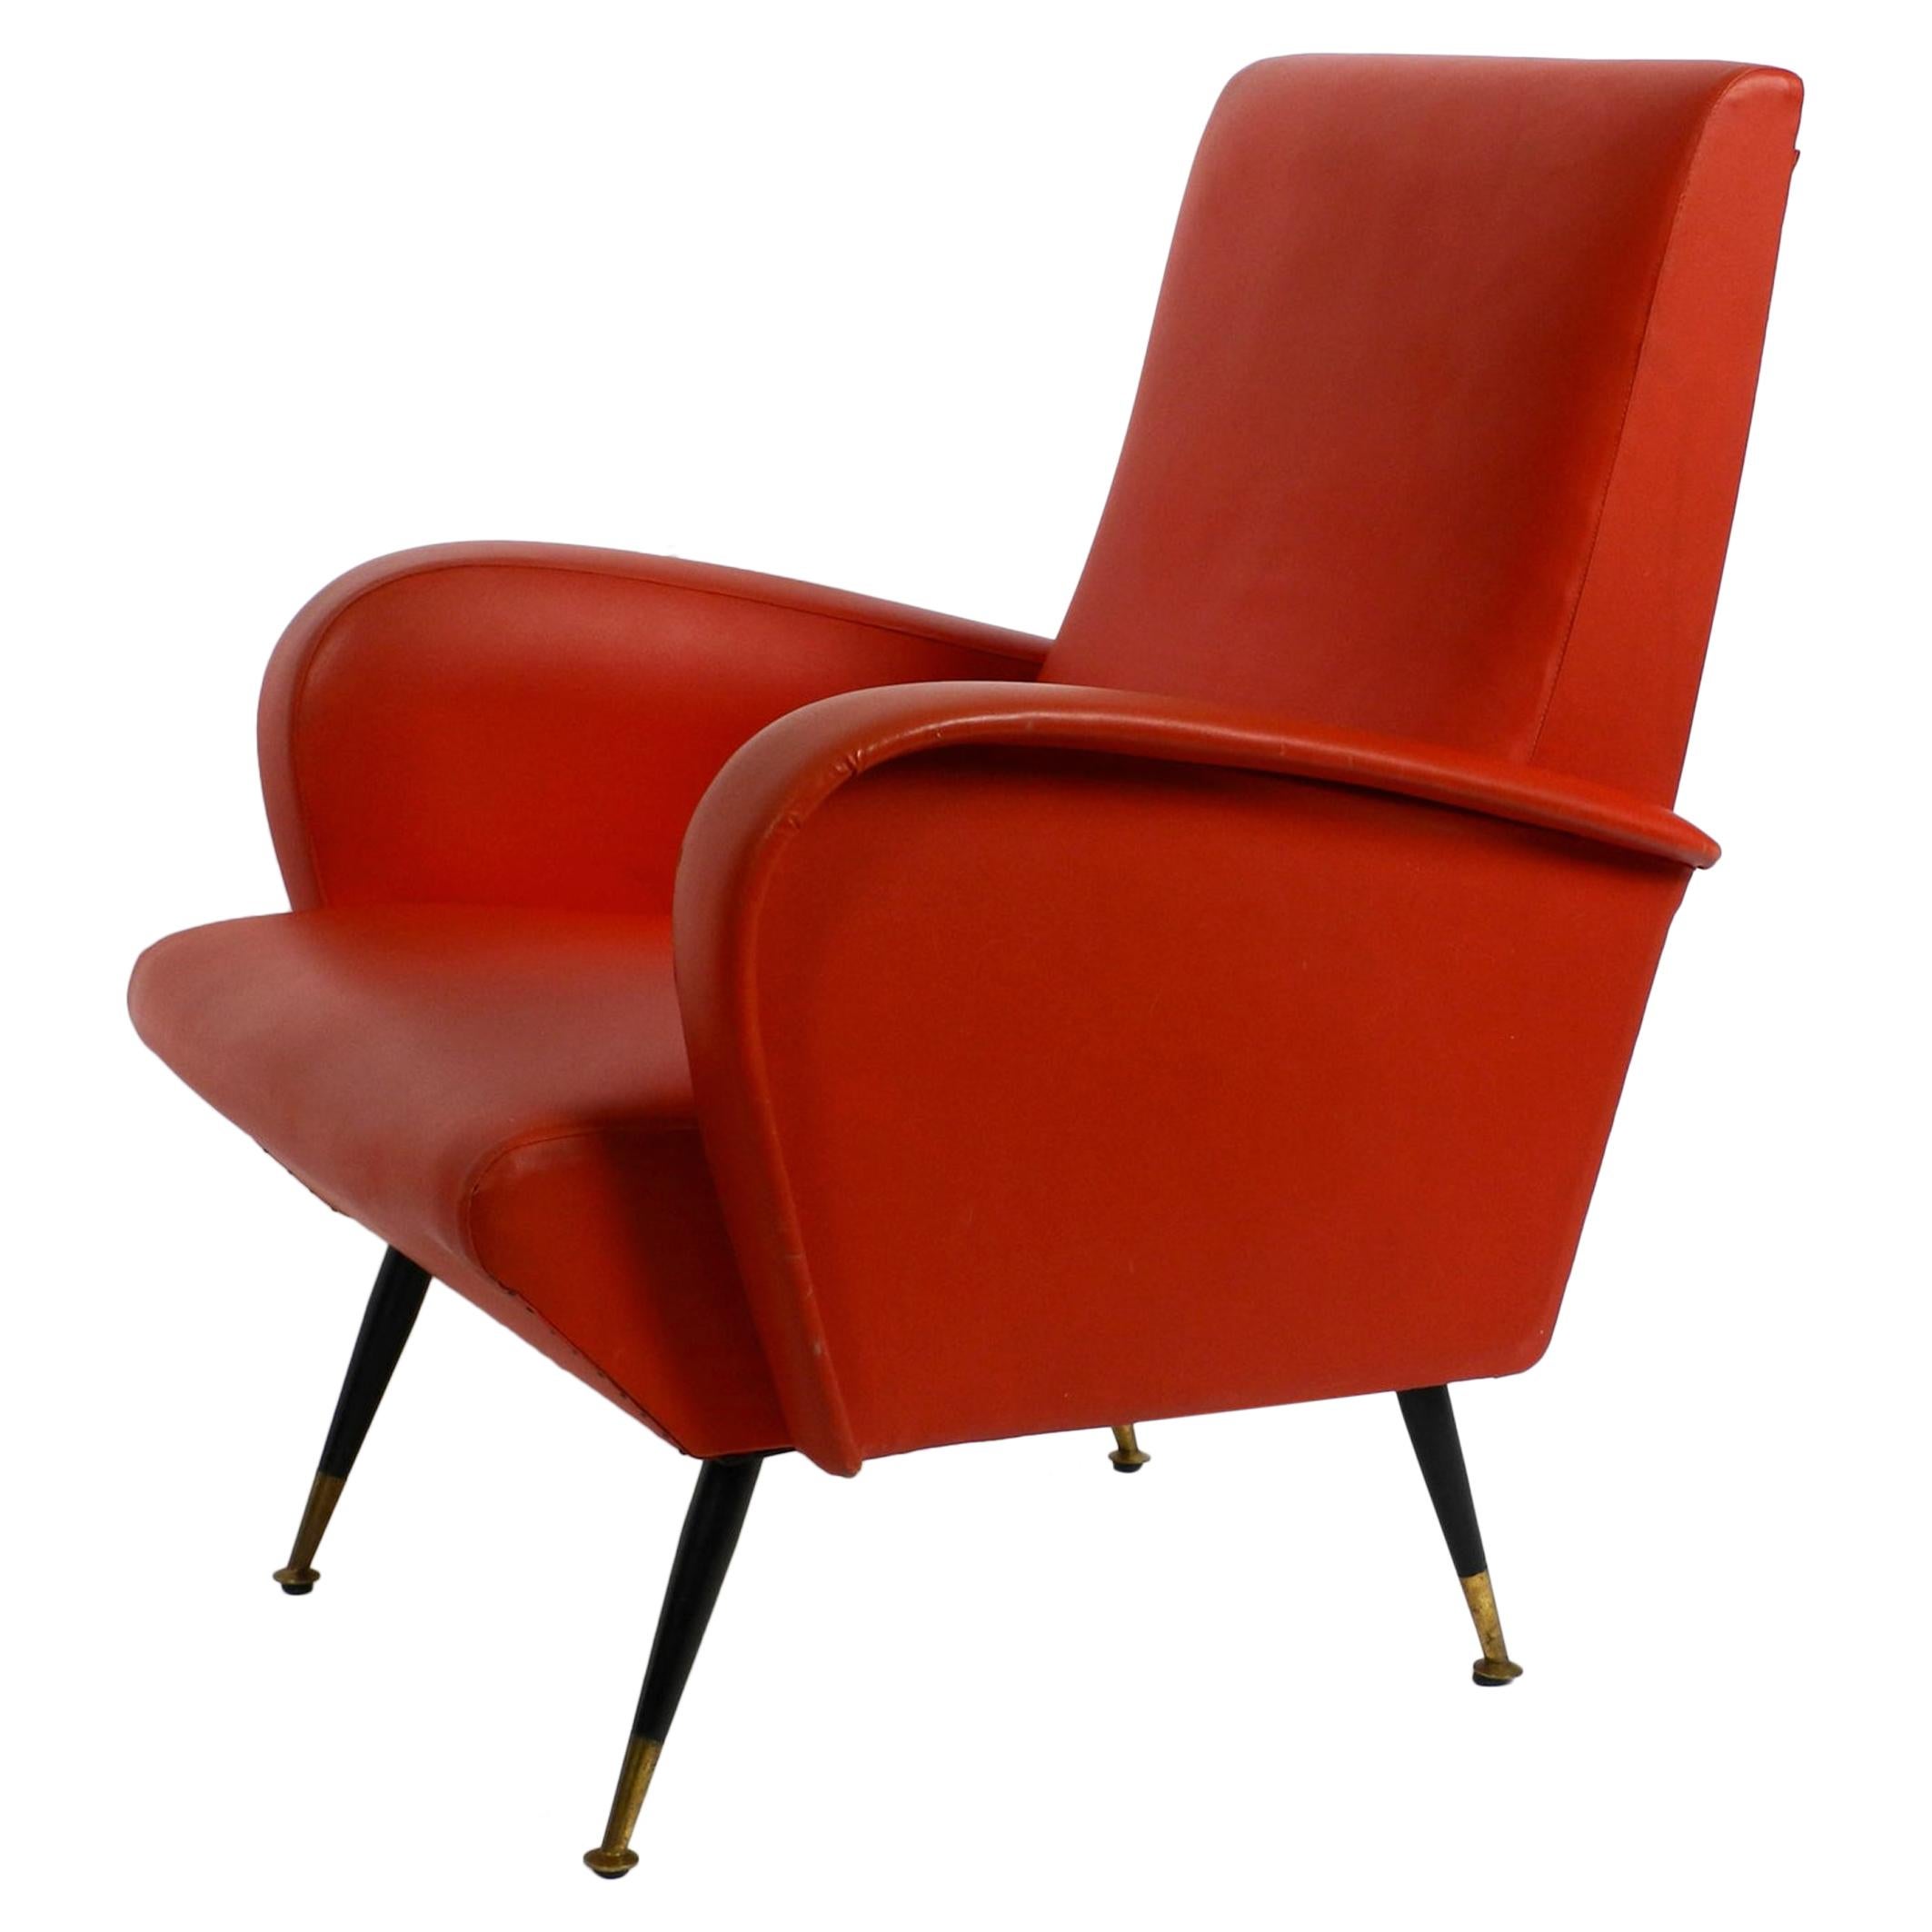 Italian Midcentury Lounge Chair with Red Original Faux Leather Cover